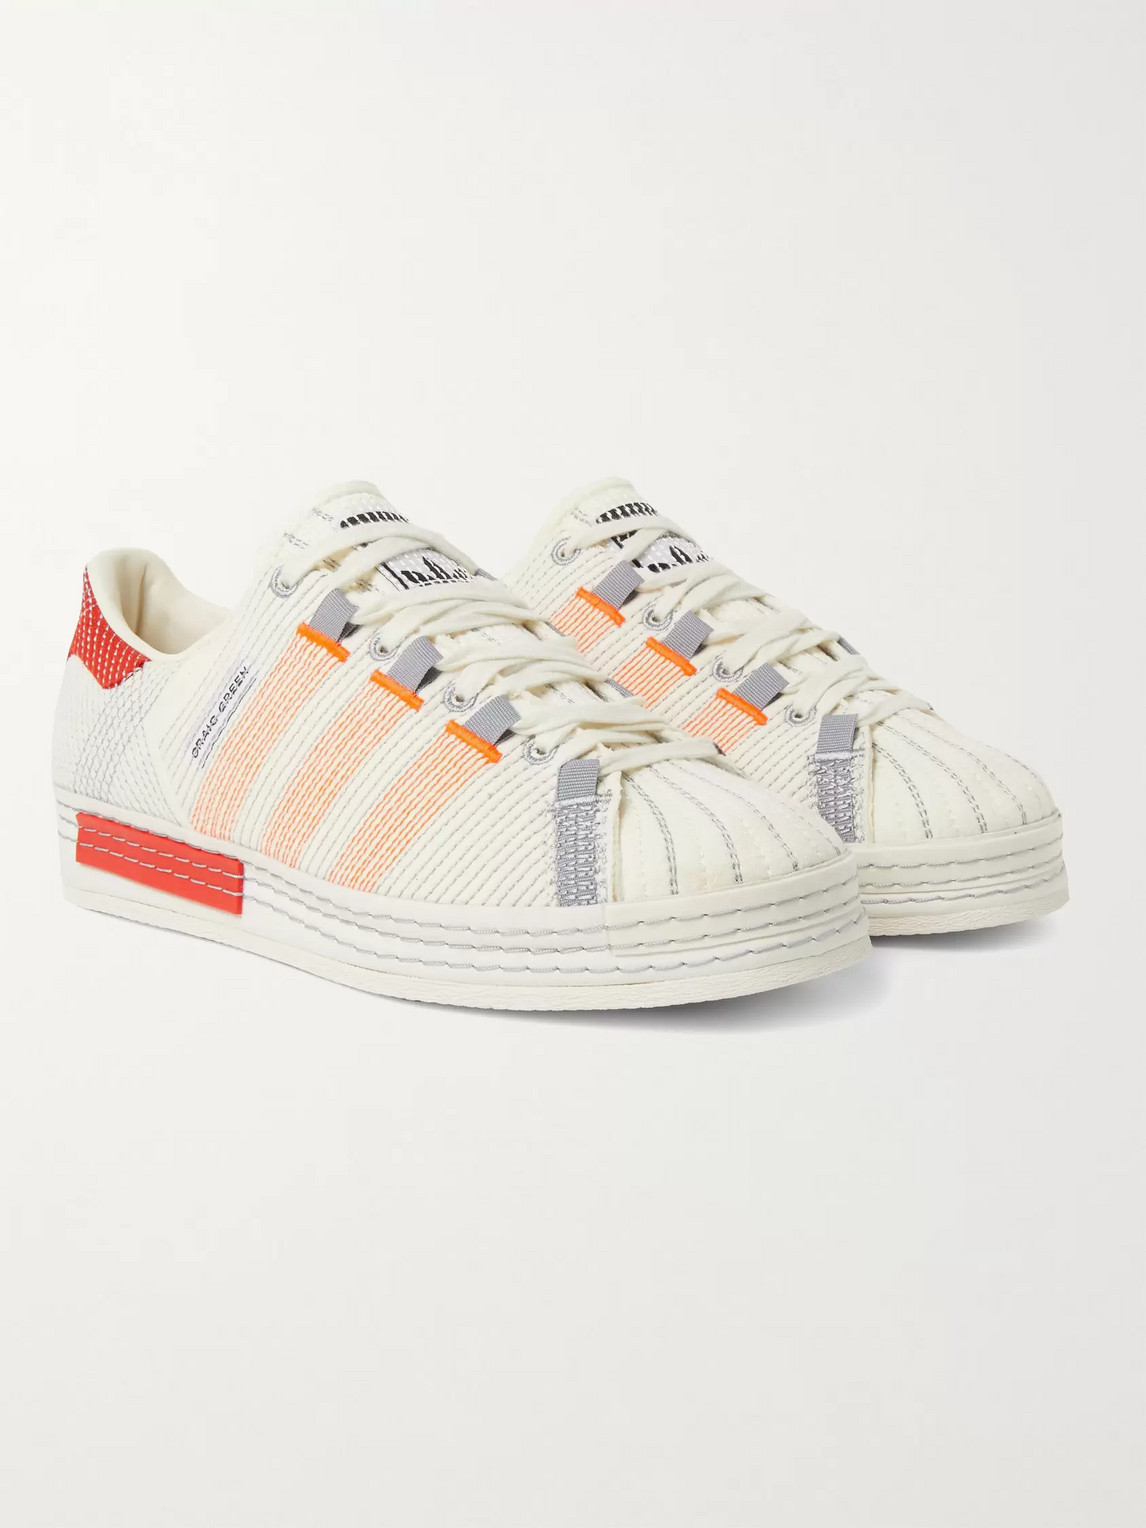 Adidas Consortium Craig Green Superstar Embroidered Faux Suede Sneakers In White